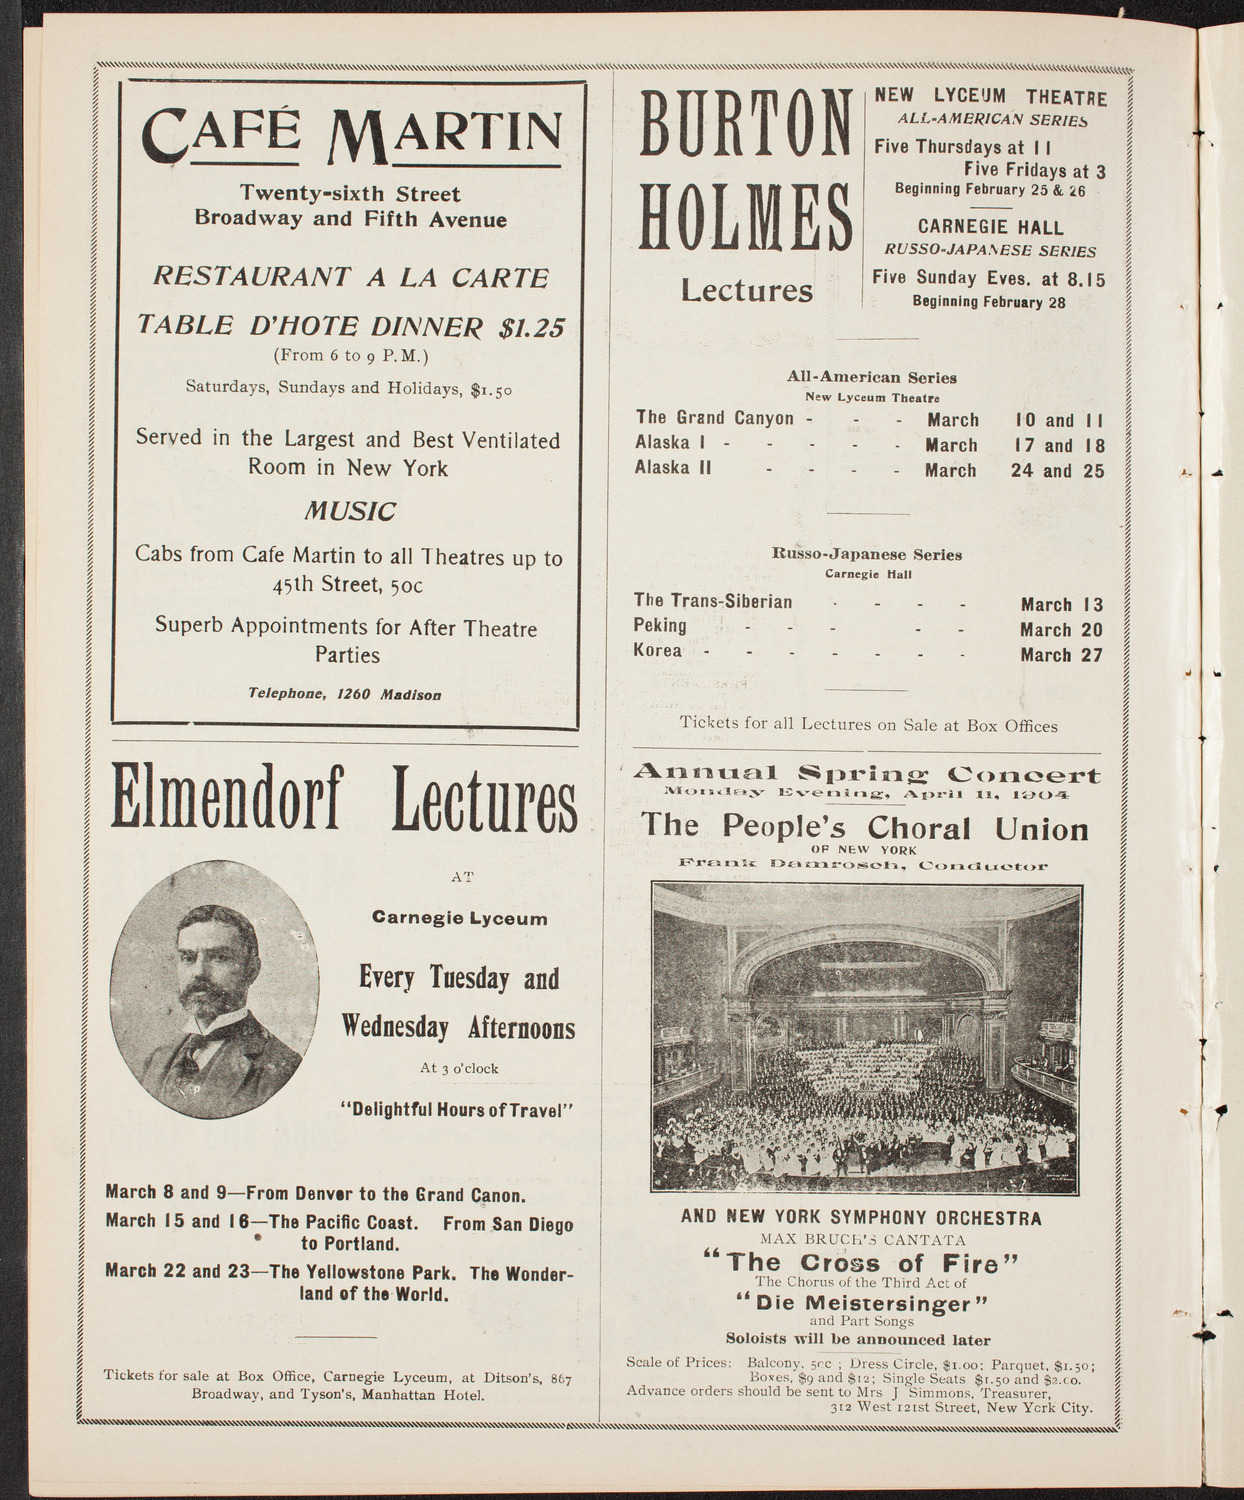 Burton Holmes Travelogue: Moscow: The Heart of Russia, March 6, 1904, program page 10